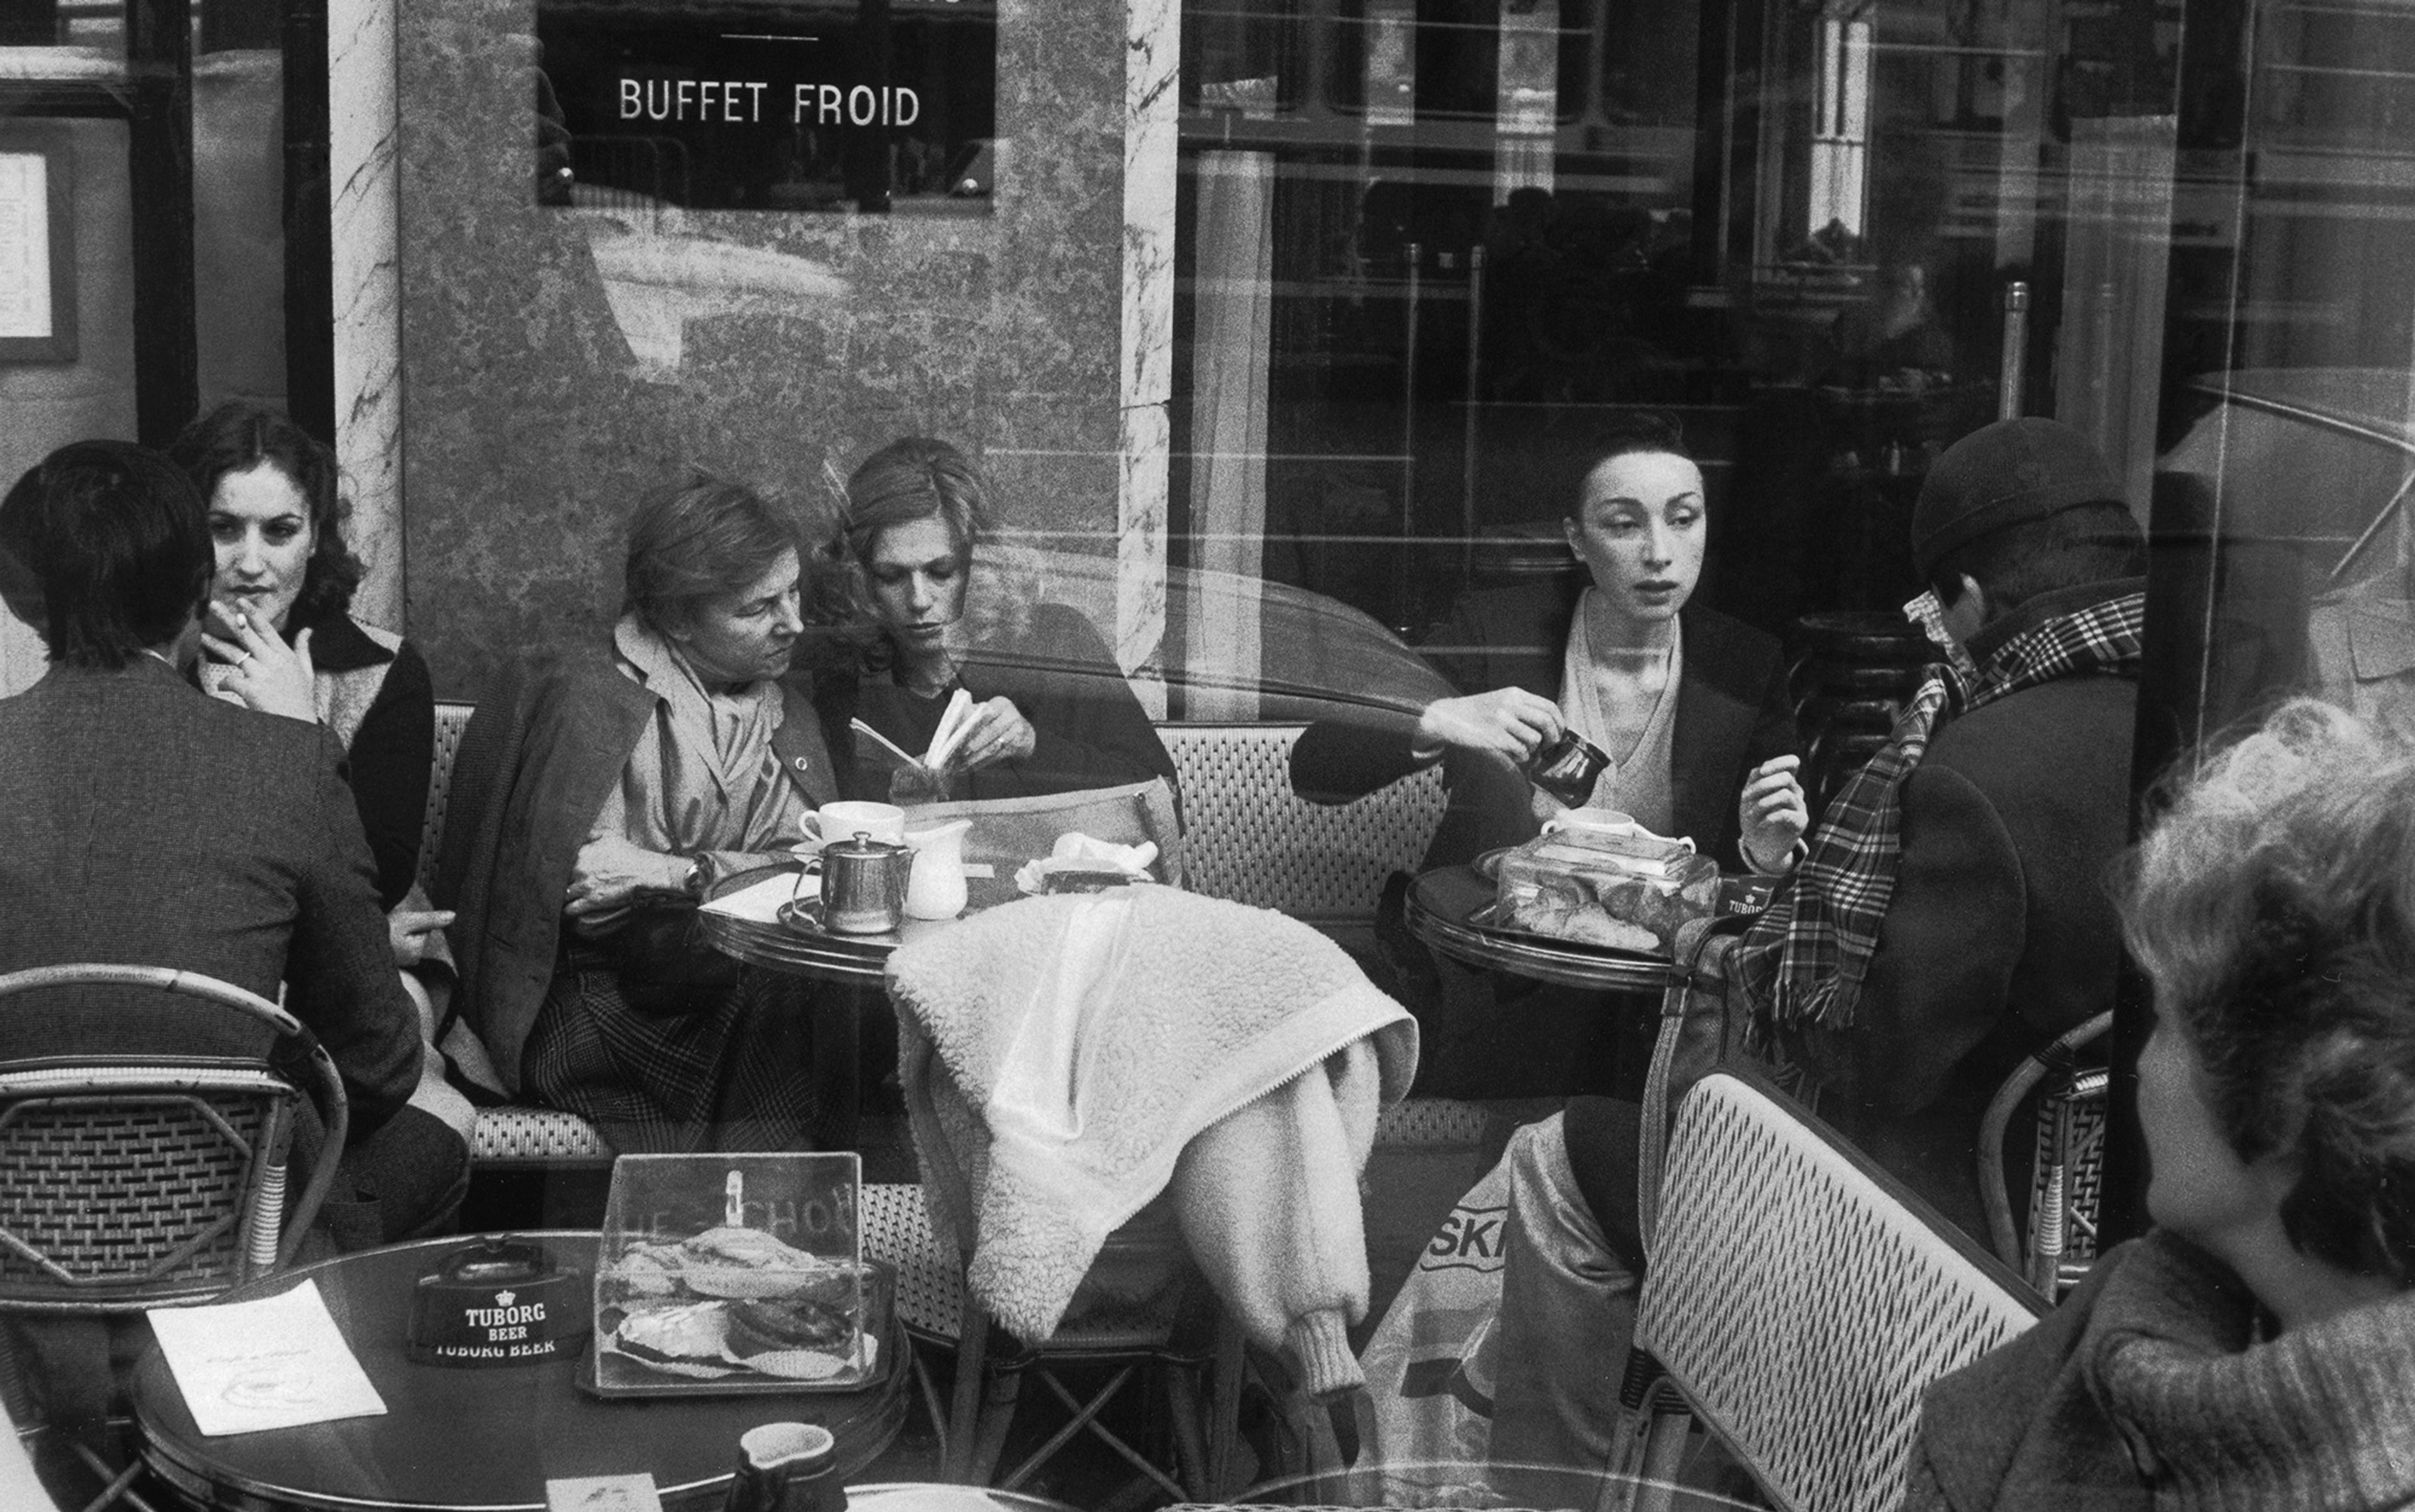 Black and white photo of people sitting at a café, taken through a window with reflections. A sign saying ‘BUFFET FROID’ is visible.